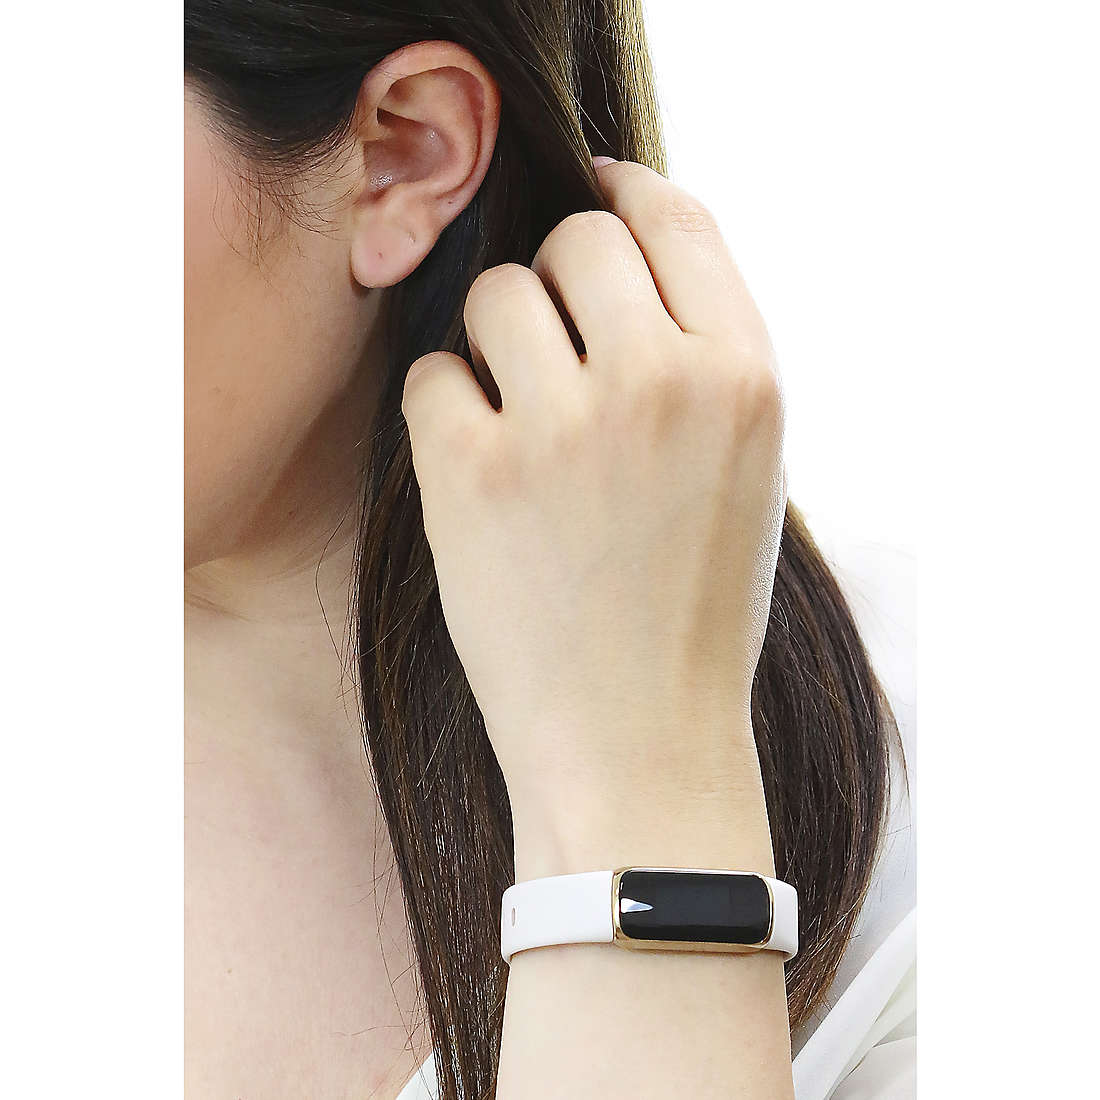 Fitbit Smartwatches Luxe woman FB422GLWT wearing